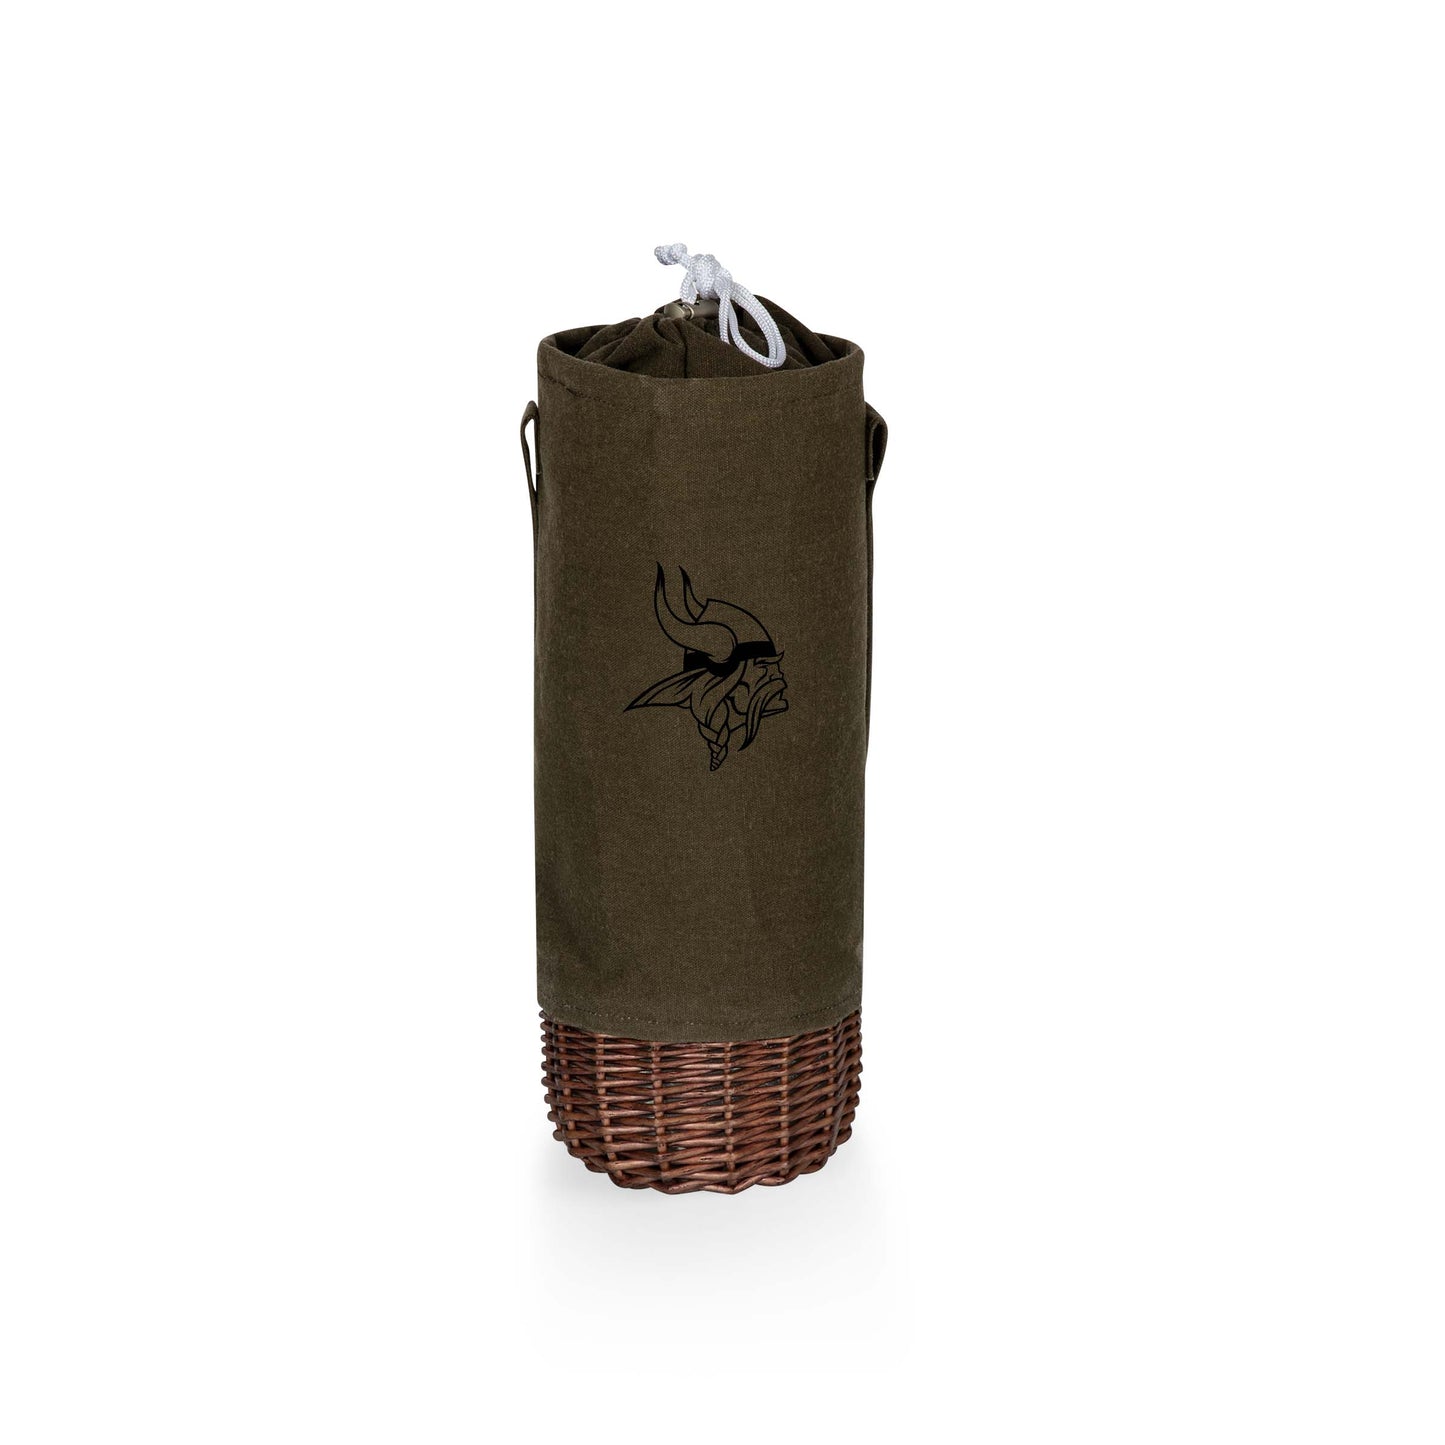 Minnesota Vikings - Malbec Insulated Canvas and Willow Wine Bottle Basket